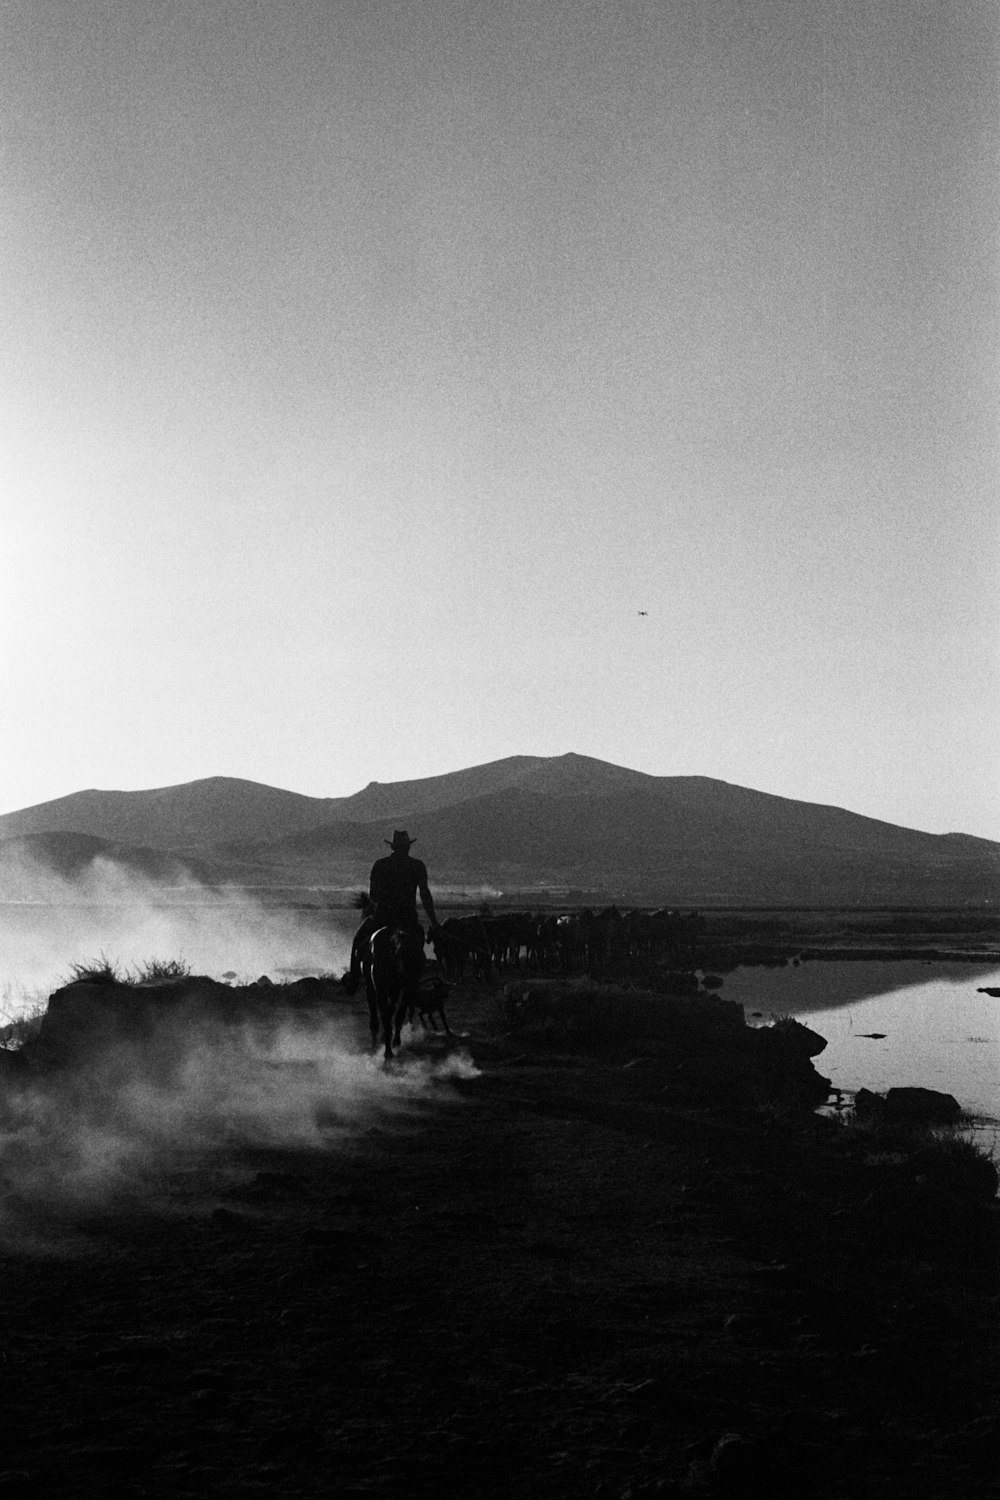 a black and white photo of a person riding a bike